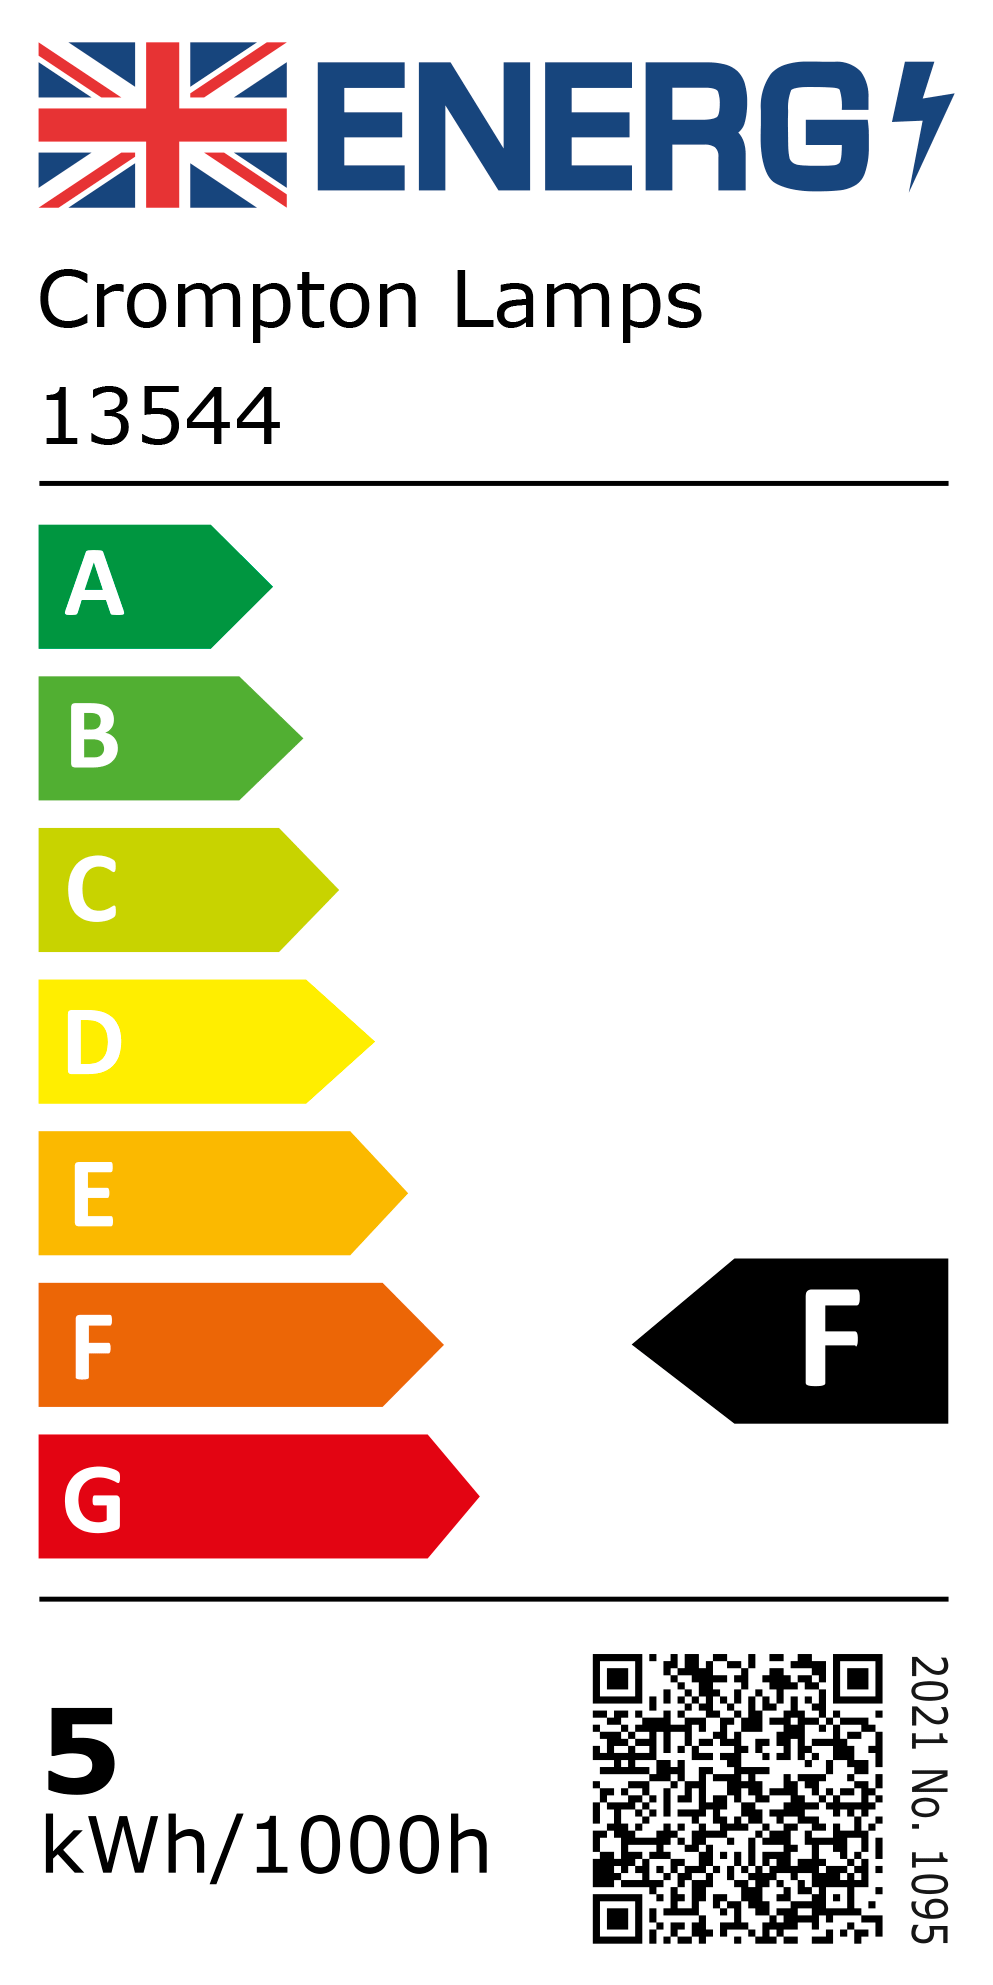 New 2021 Energy Rating Label: Stock Code 13544